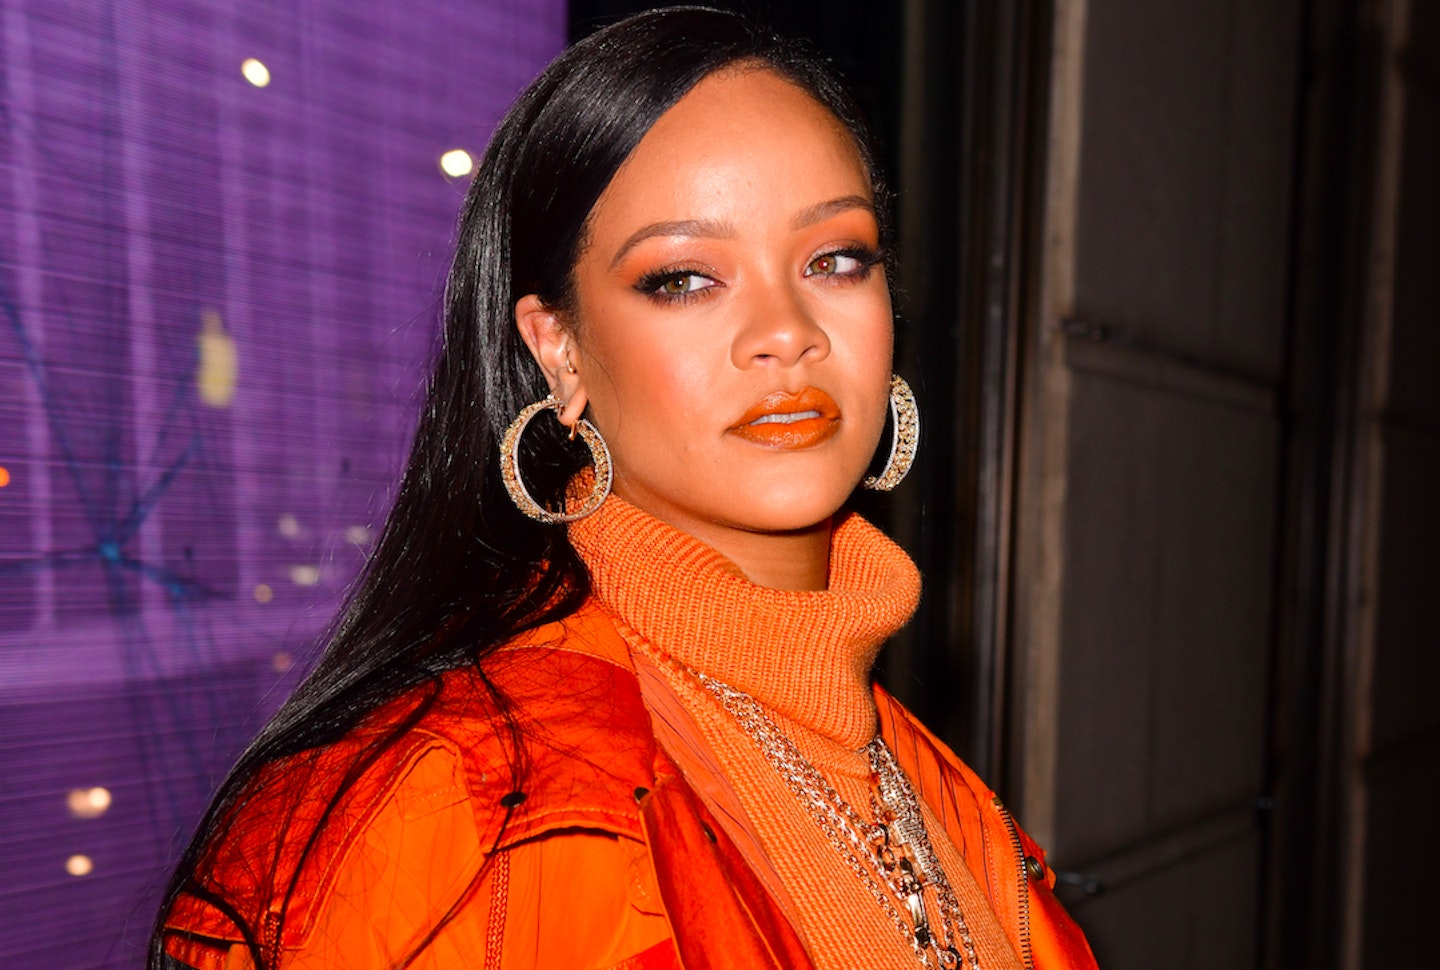 Rihanna's Fenty Fashion House Closing After Less Than Two Years